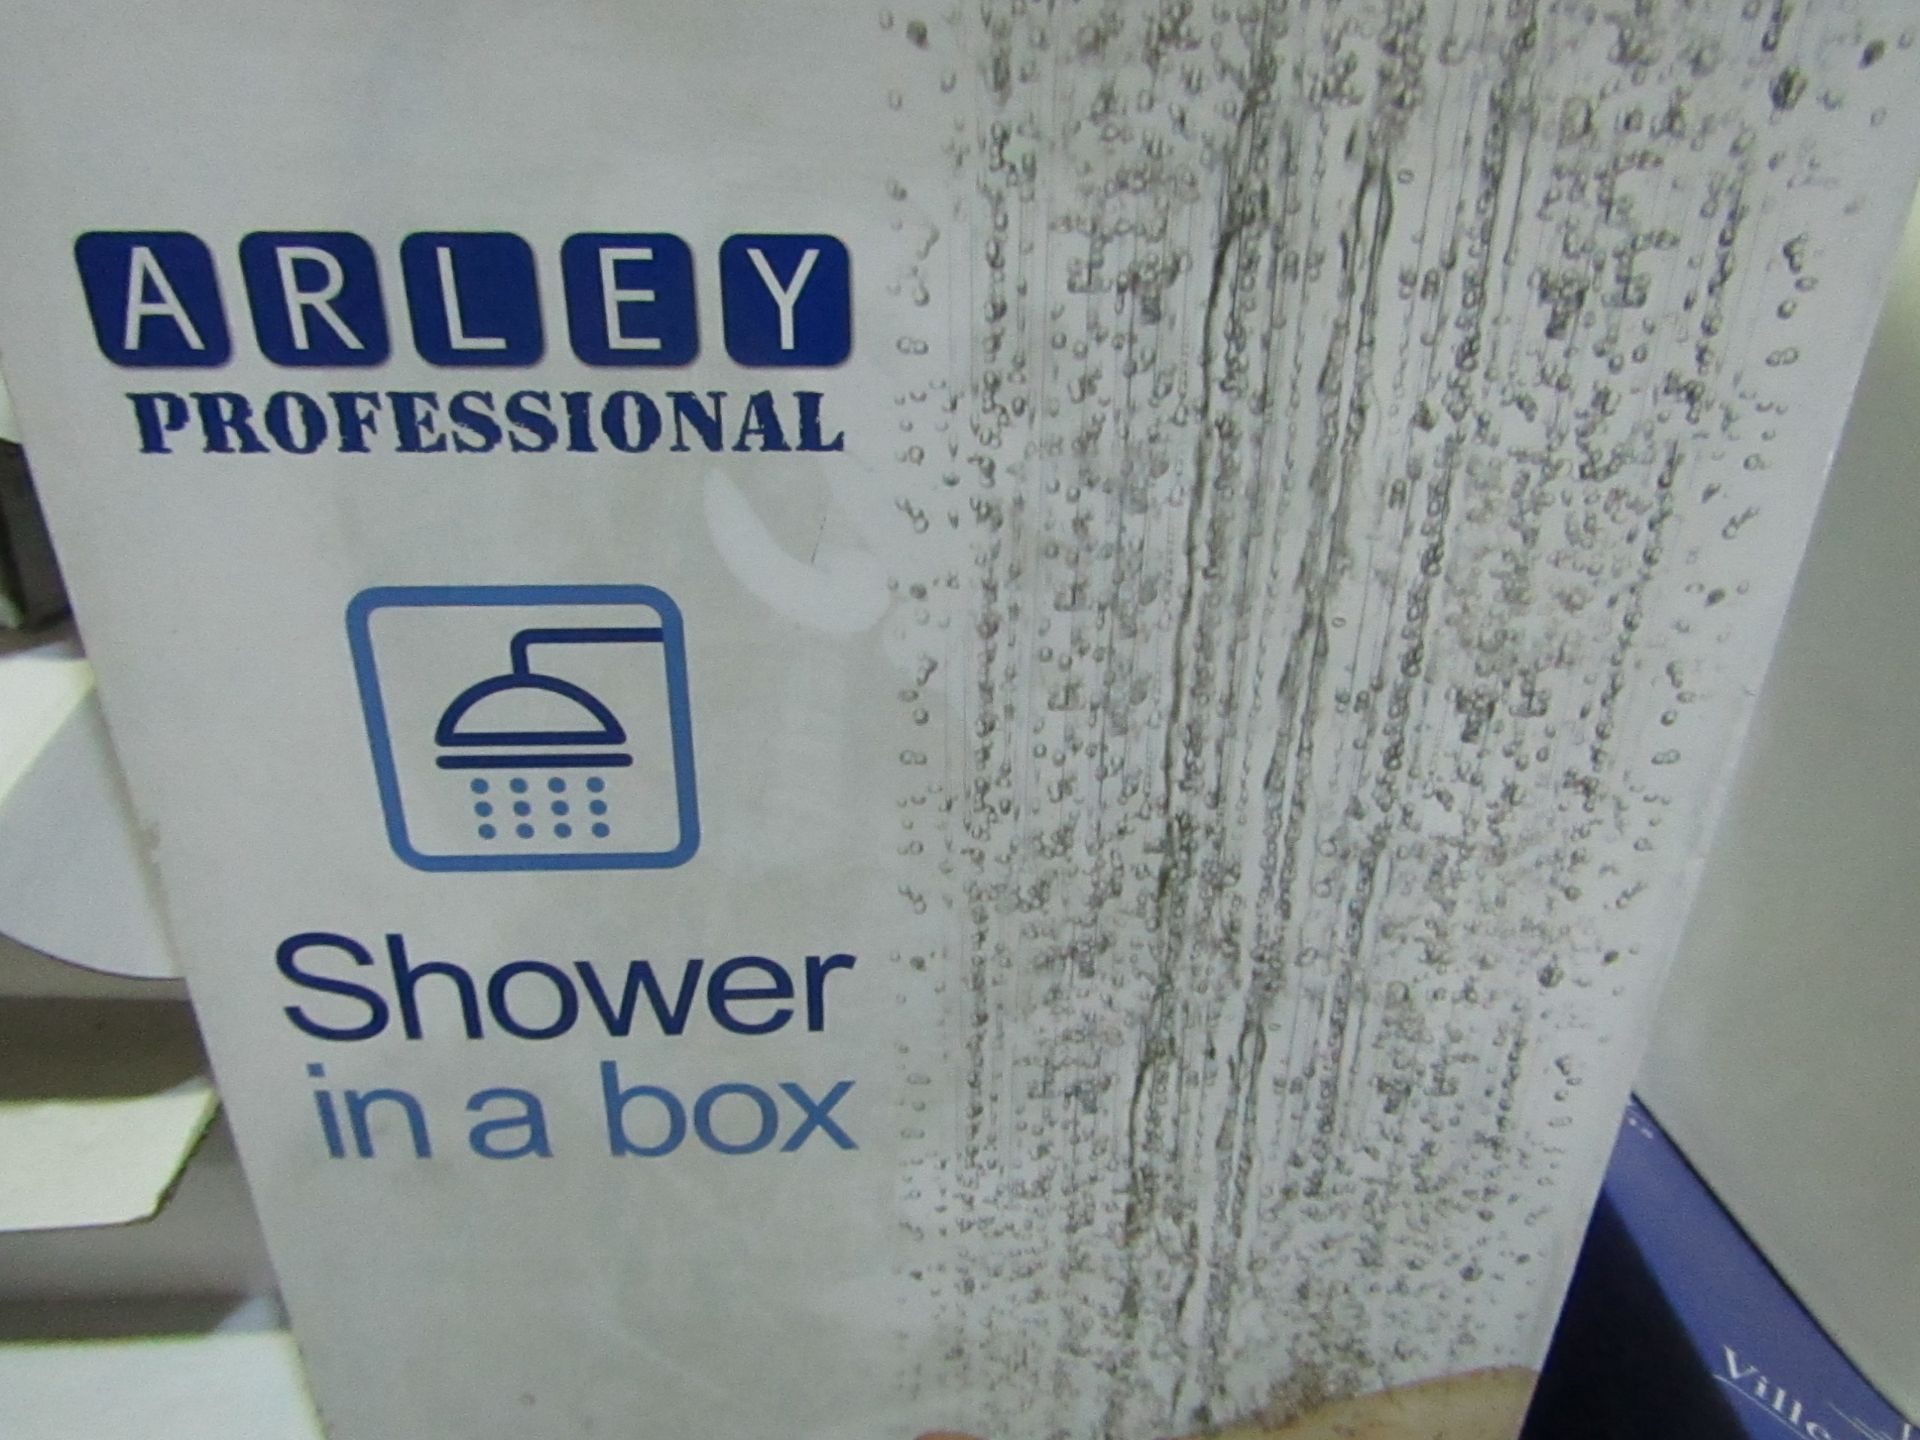 Arley Professional - Superior Shower Triple Square Concealed Kit ( 0.2bar +) - Includes Square Head,